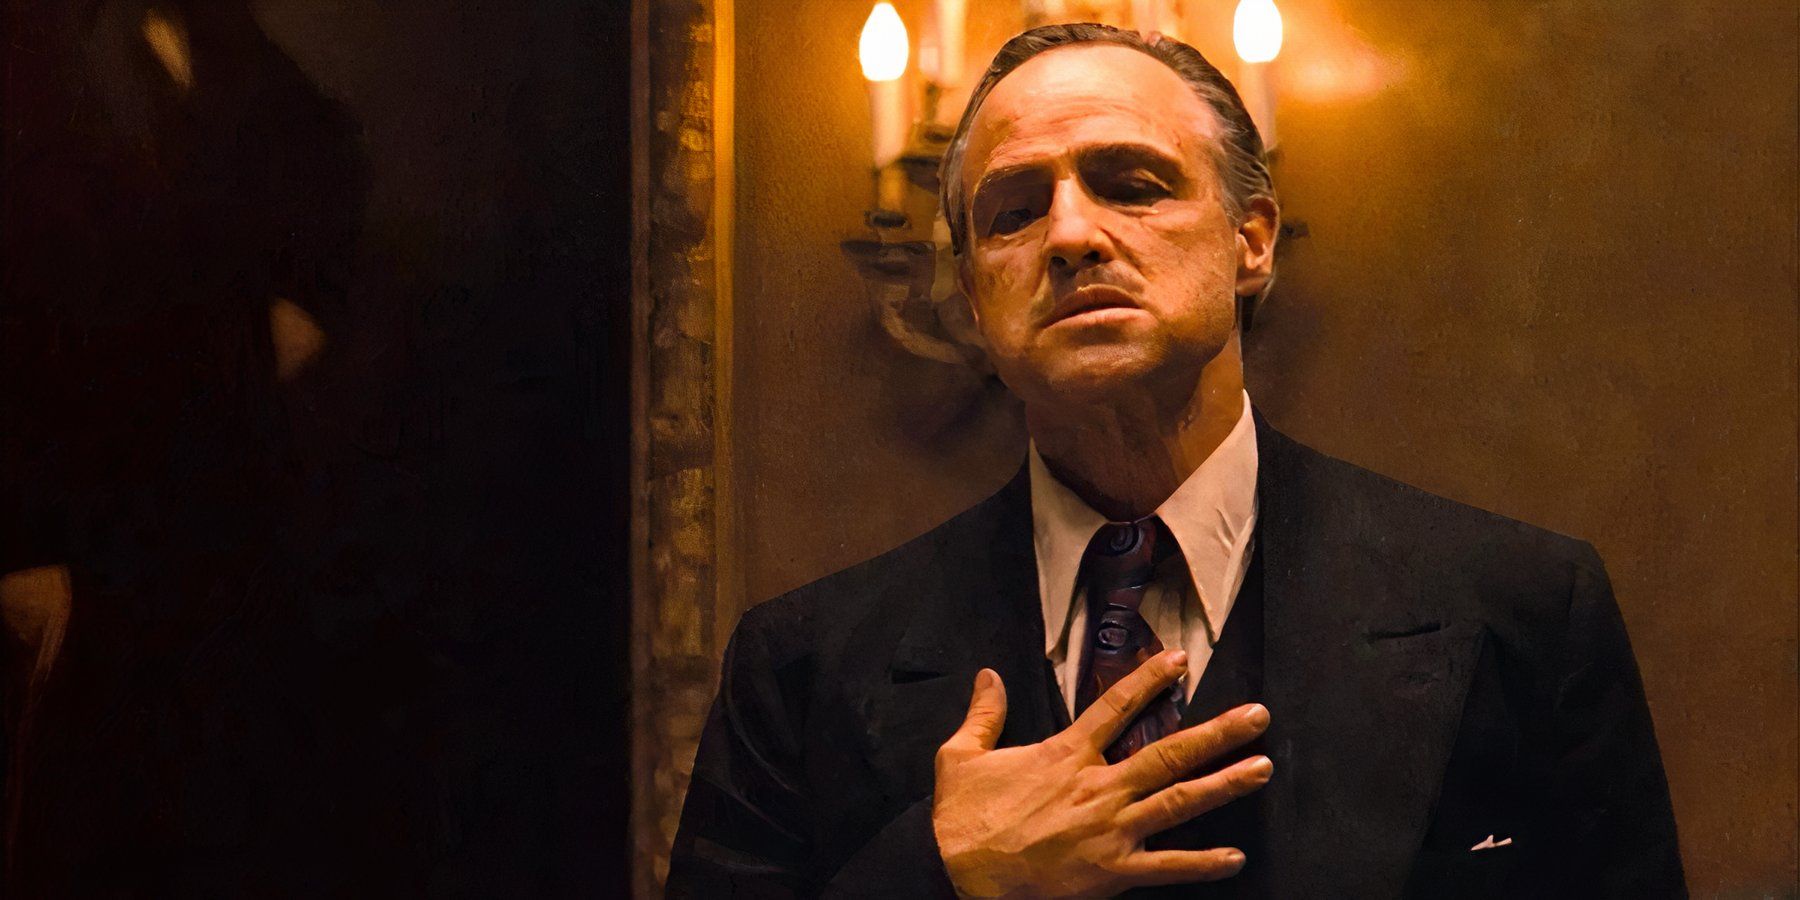 Don Vito Corleone places his hand on his heart for a somber vow in The Godfather.